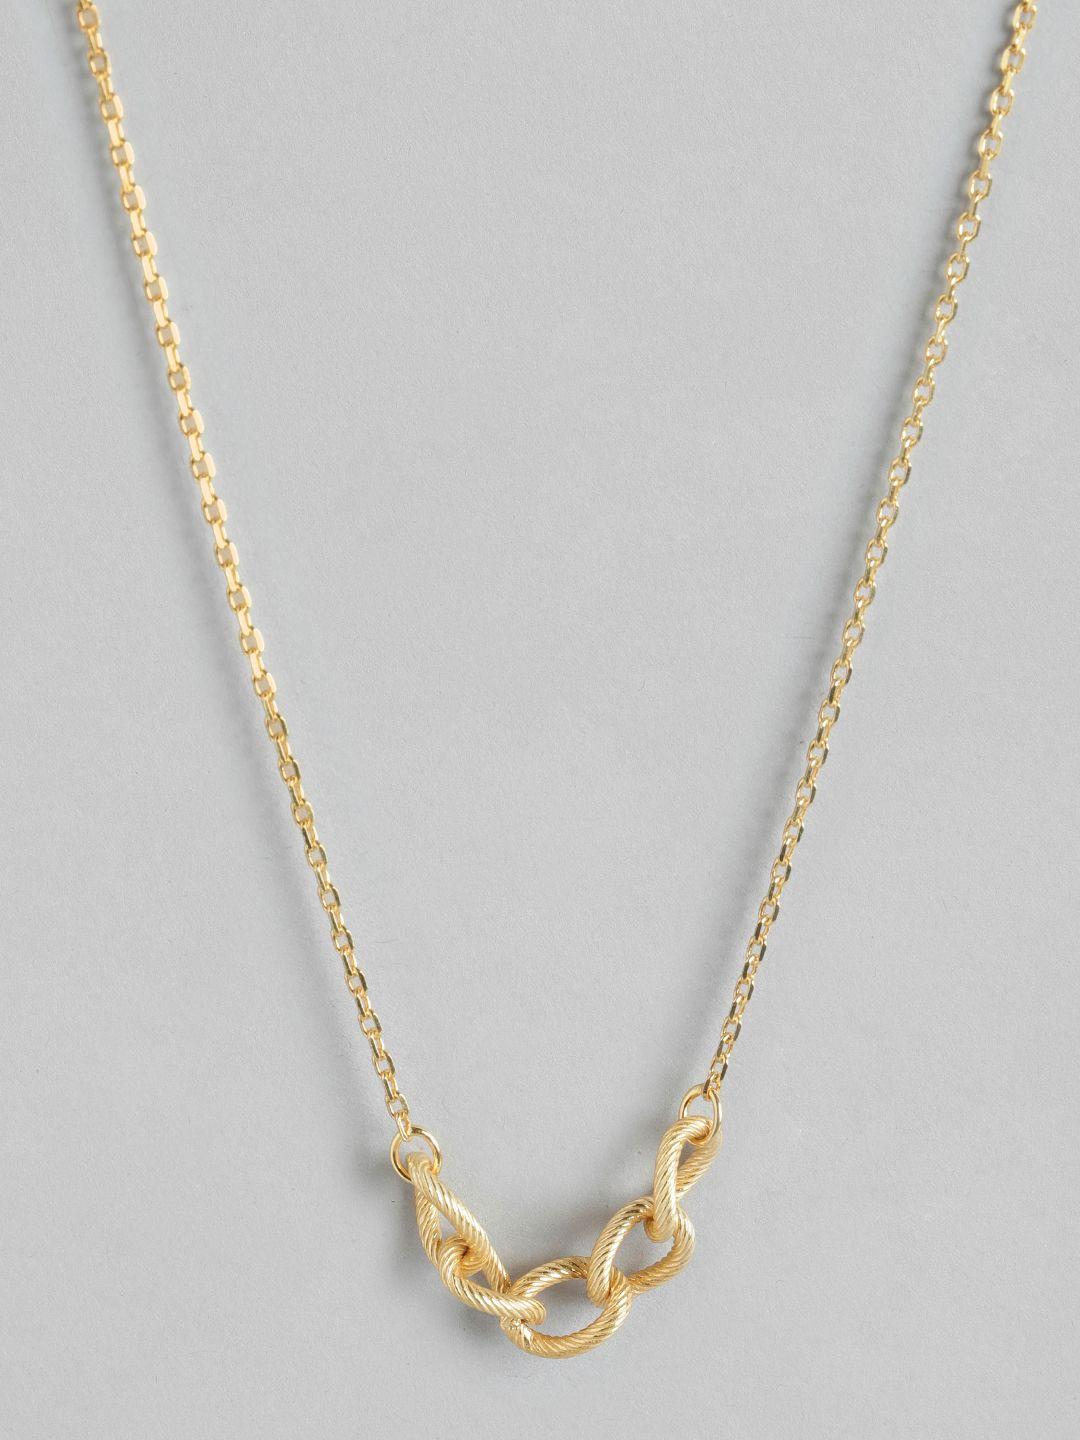 carlton london brass gold-plated necklace